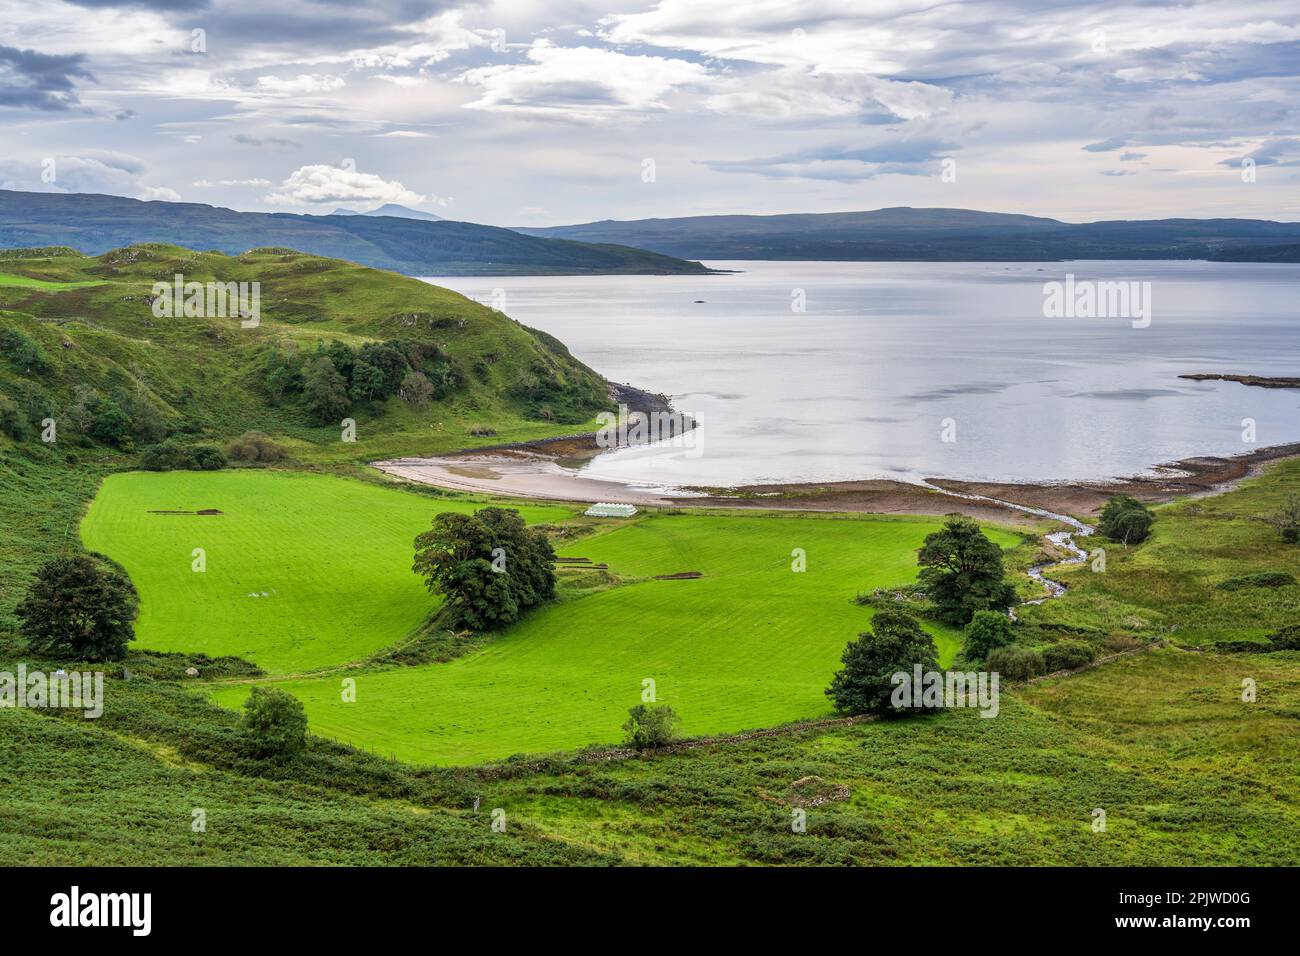 View looking down on the sandy bay of Camas nan Geall (Bay of the Pledges) on the Ardnamurchan Peninsula in Lochaber, on the West Coast of Scotland Stock Photo